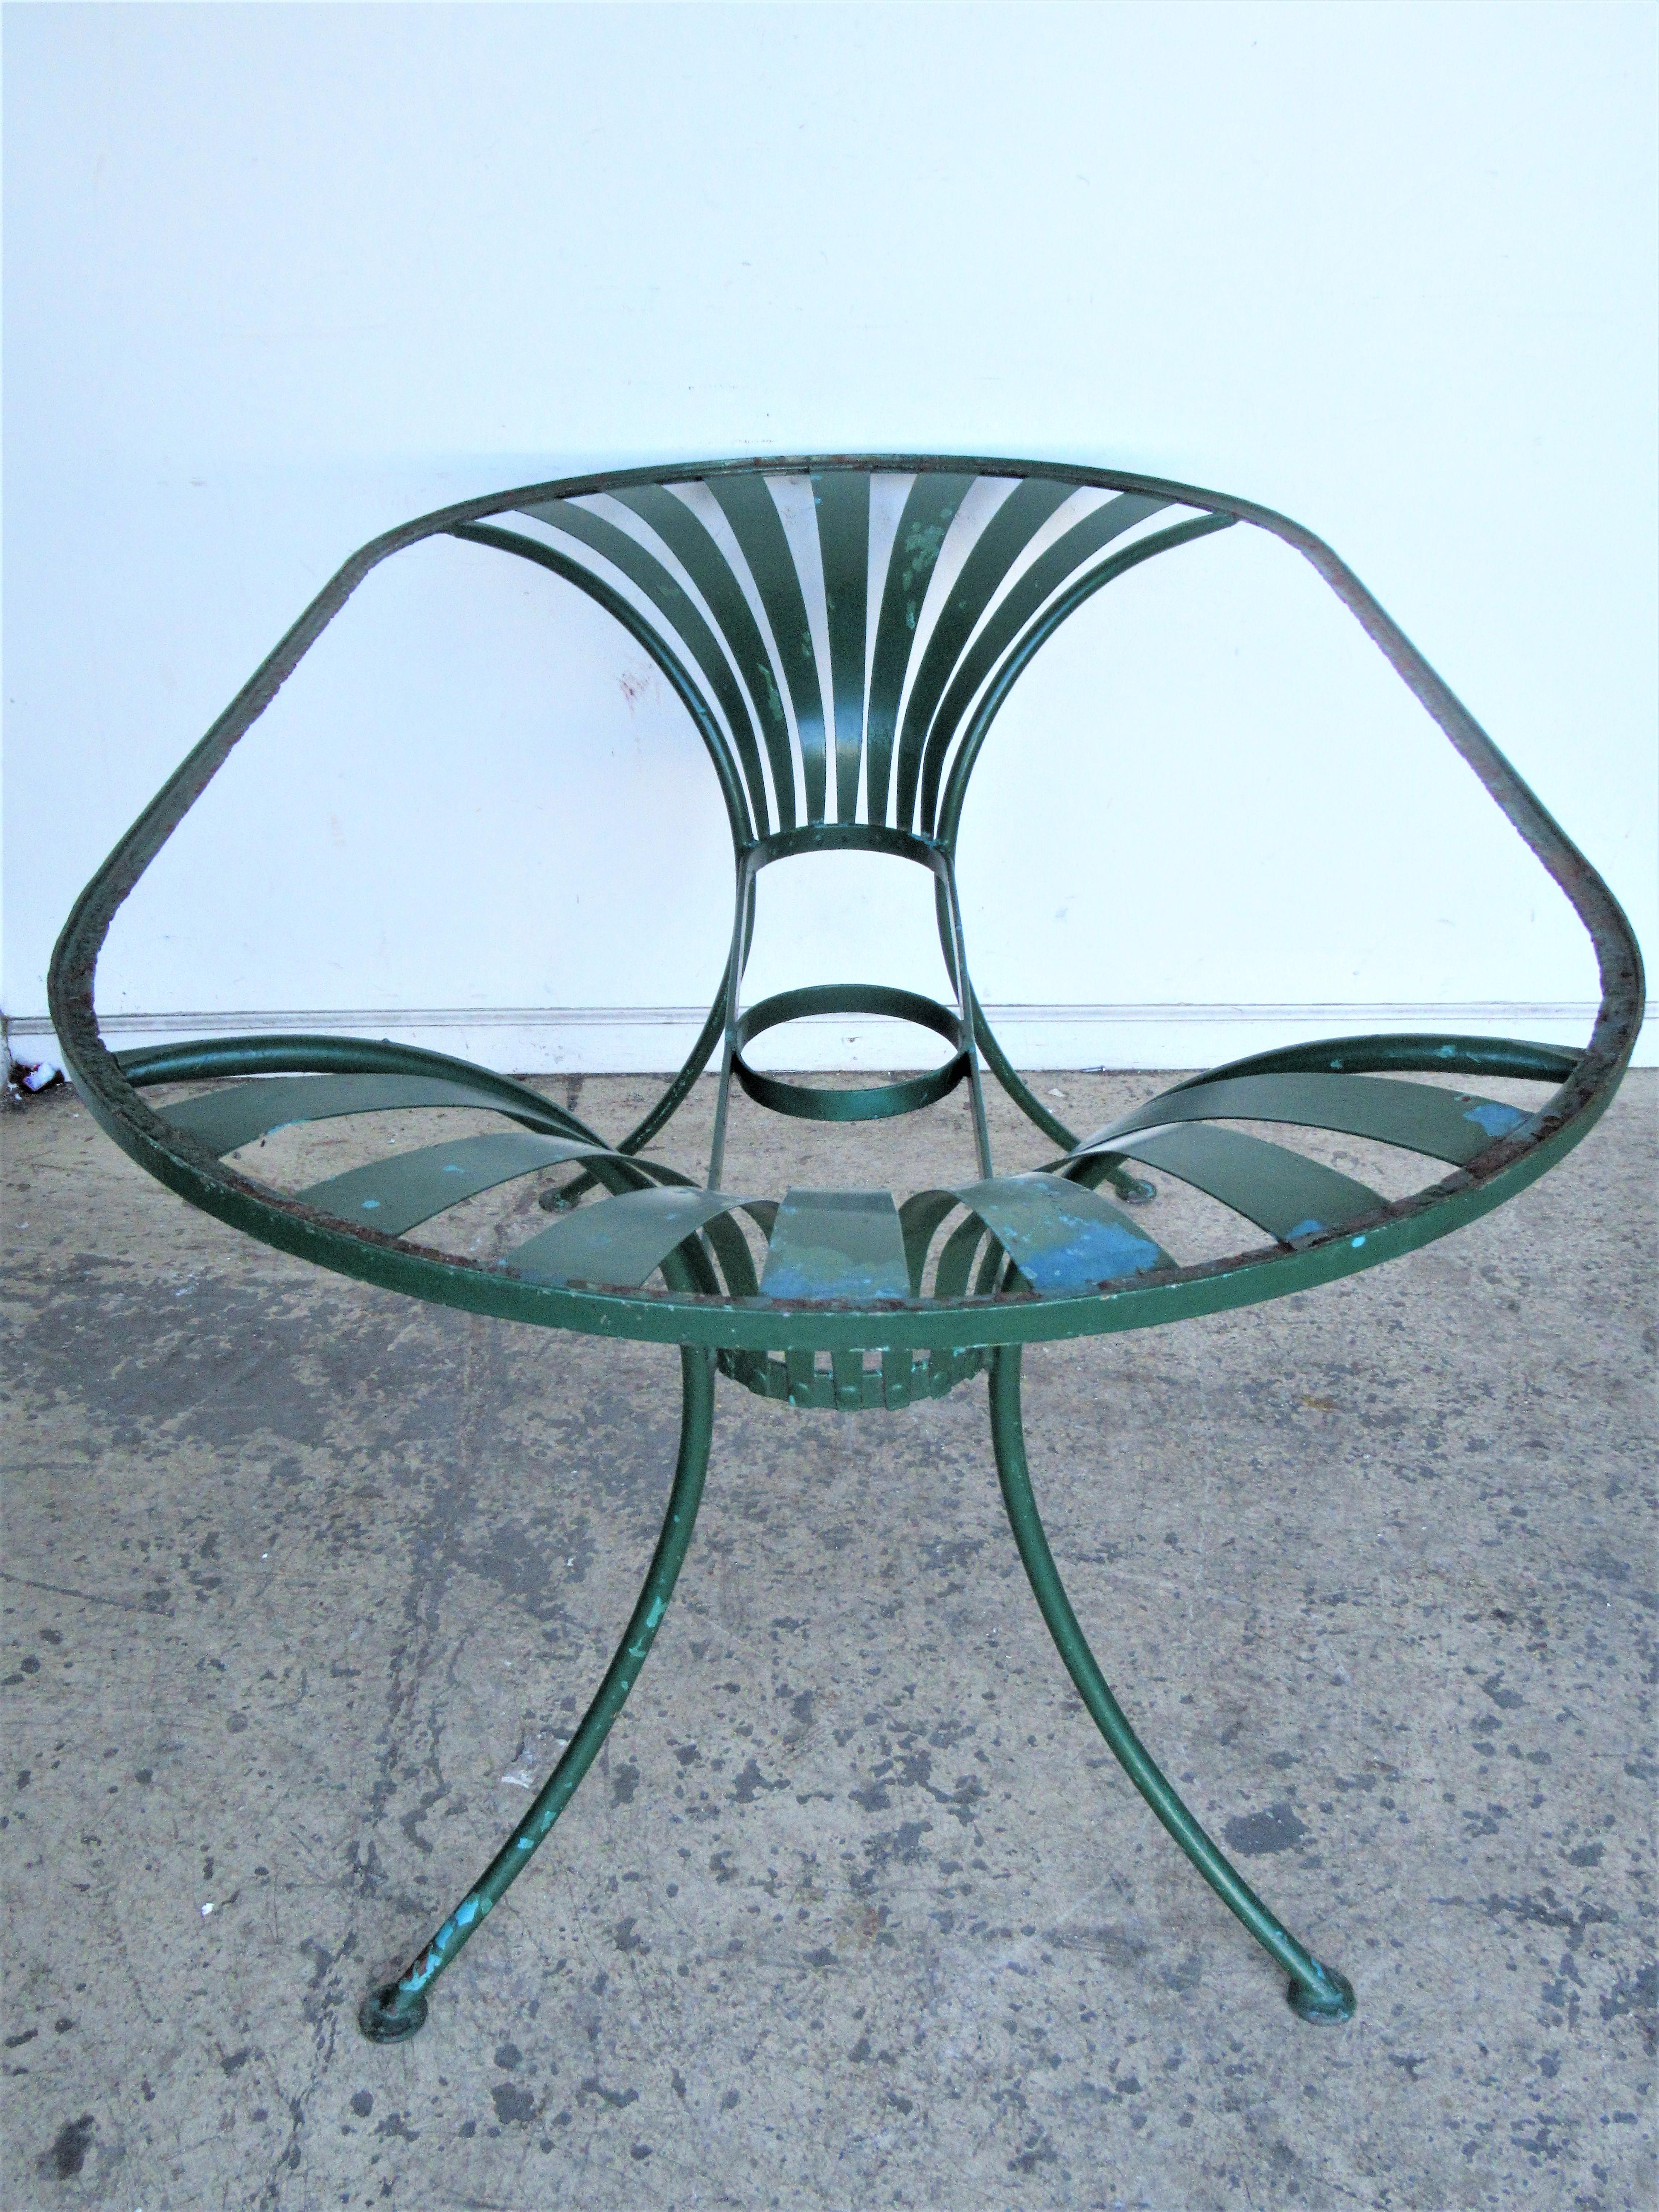  Spring Steel Garden Table and Chairs by Francois Carre 2